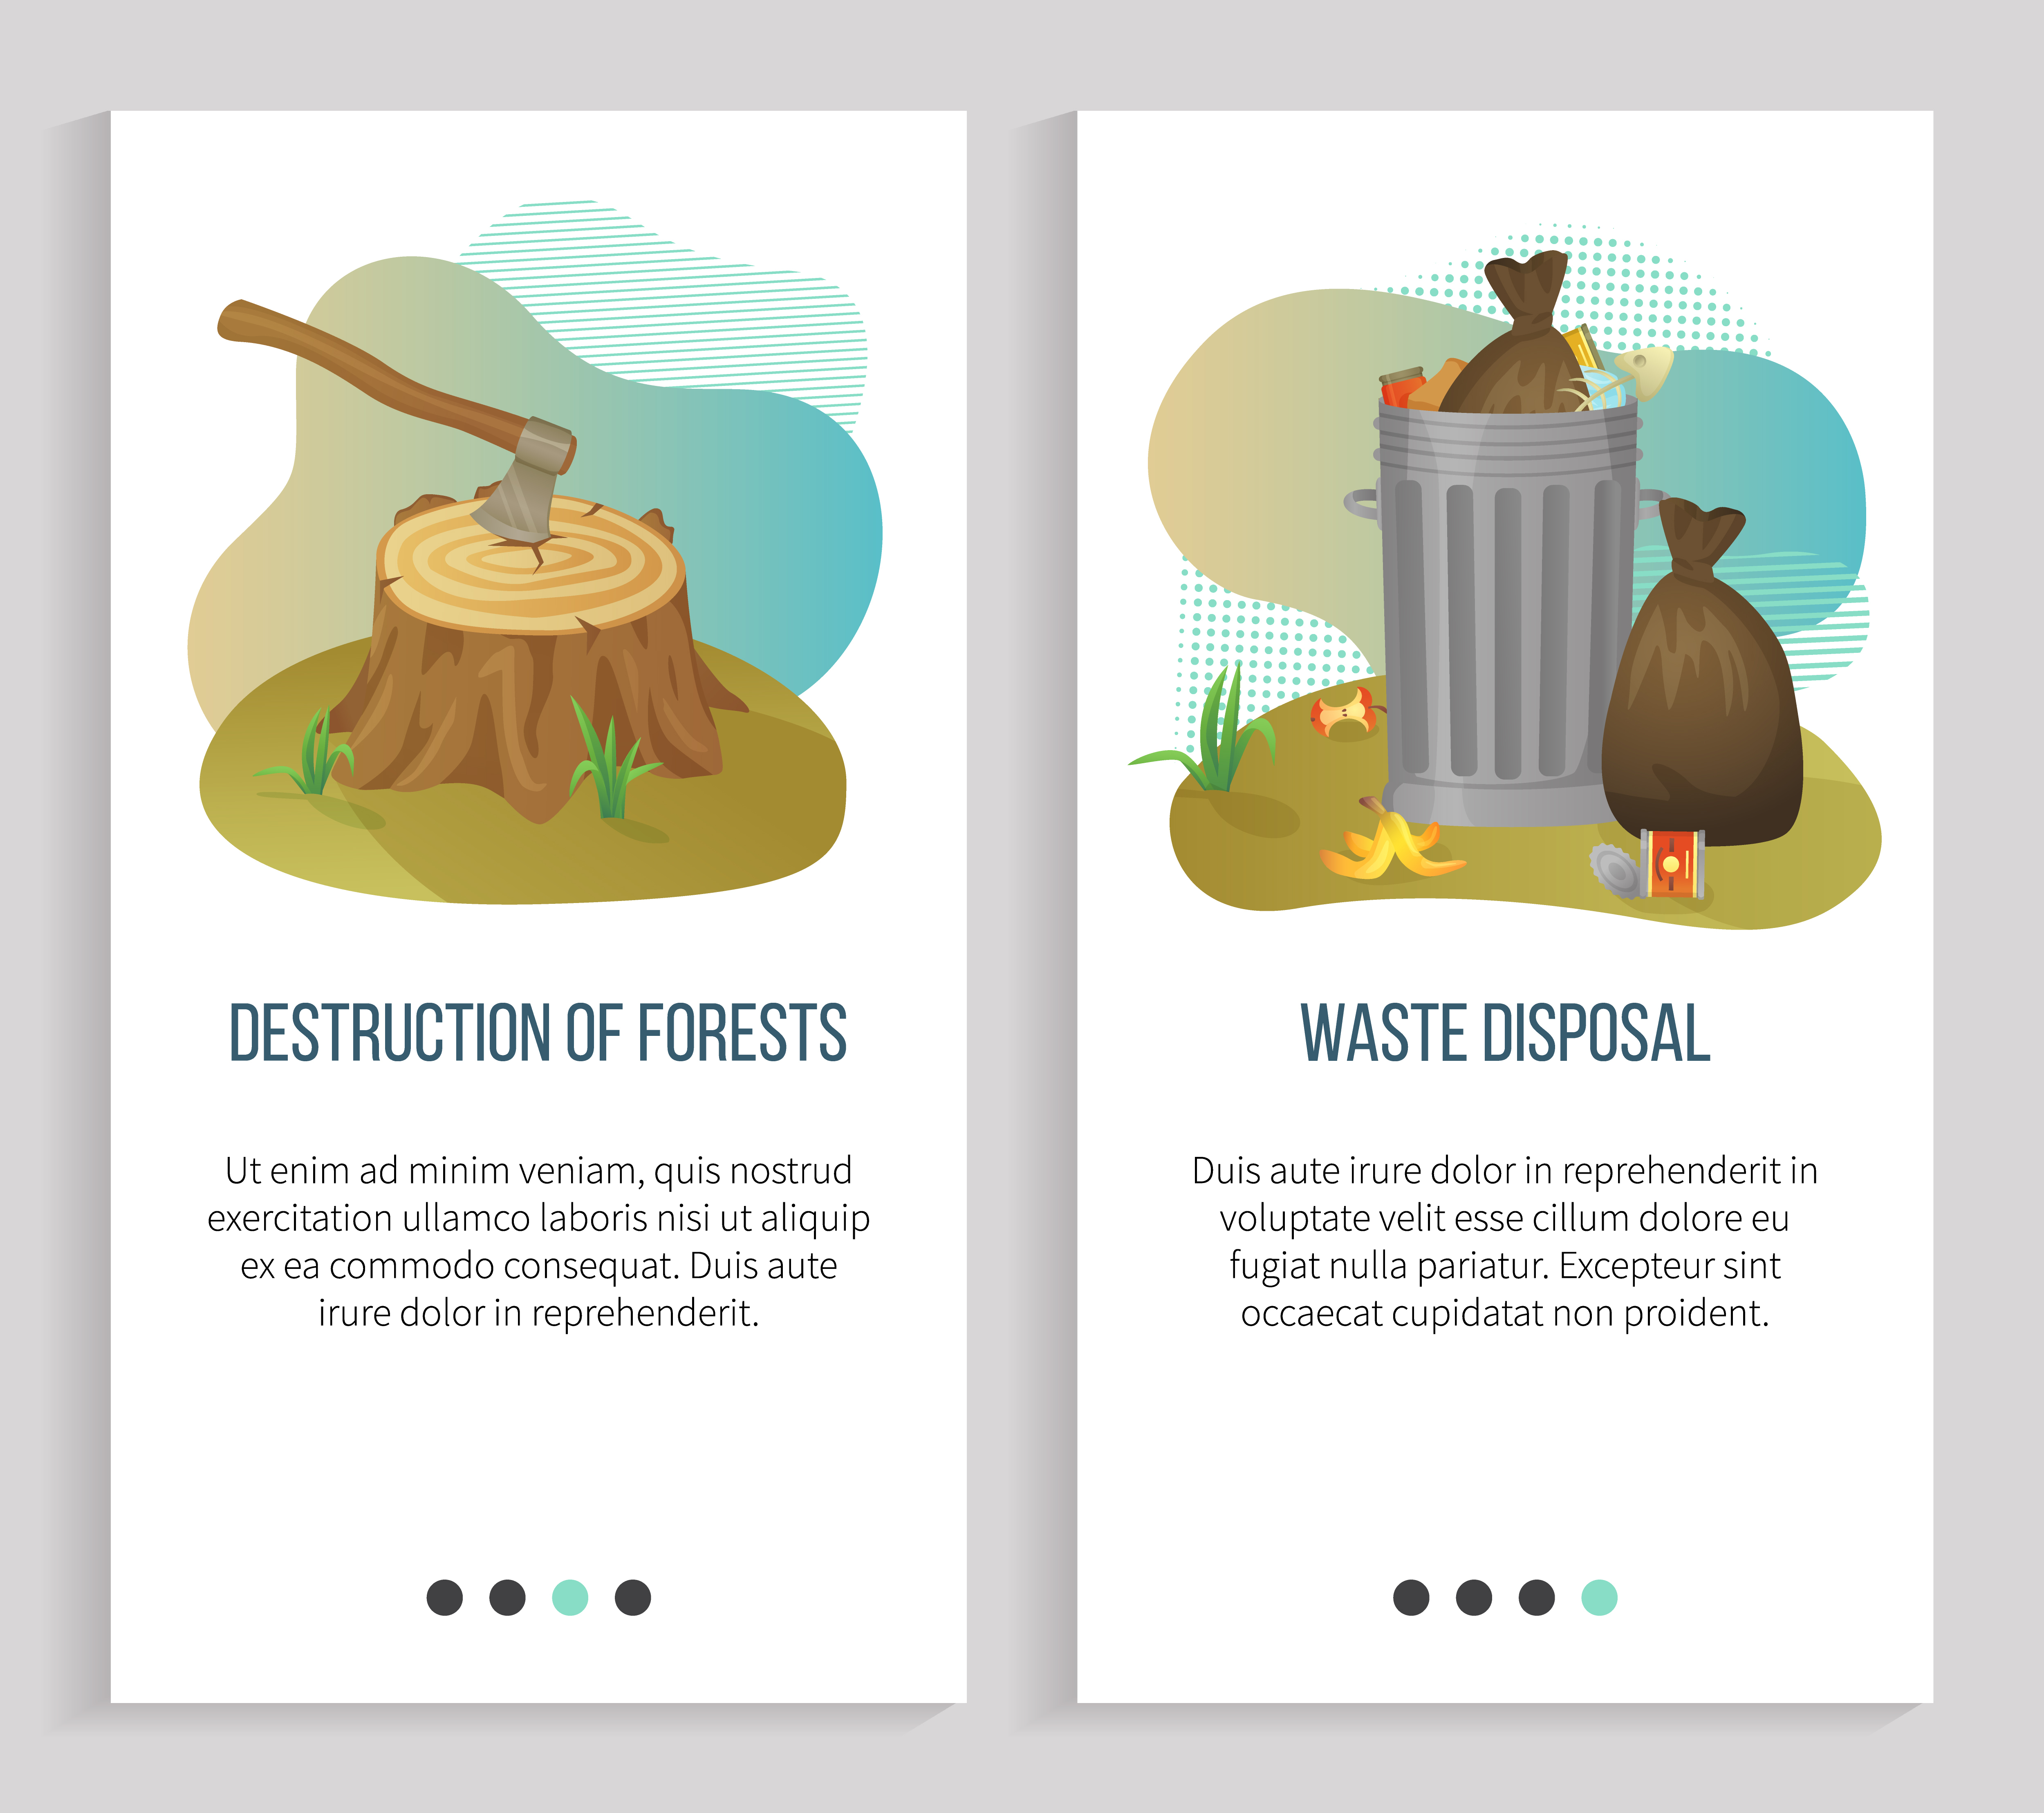 Garbage disposal and destruction of forests vector, ecological problems of planet, big with trash in bags, waste and bulky items, ax deforestation. Website or slider app, landing page flat style. Destruction of Forests and Garbage Disposal Vector